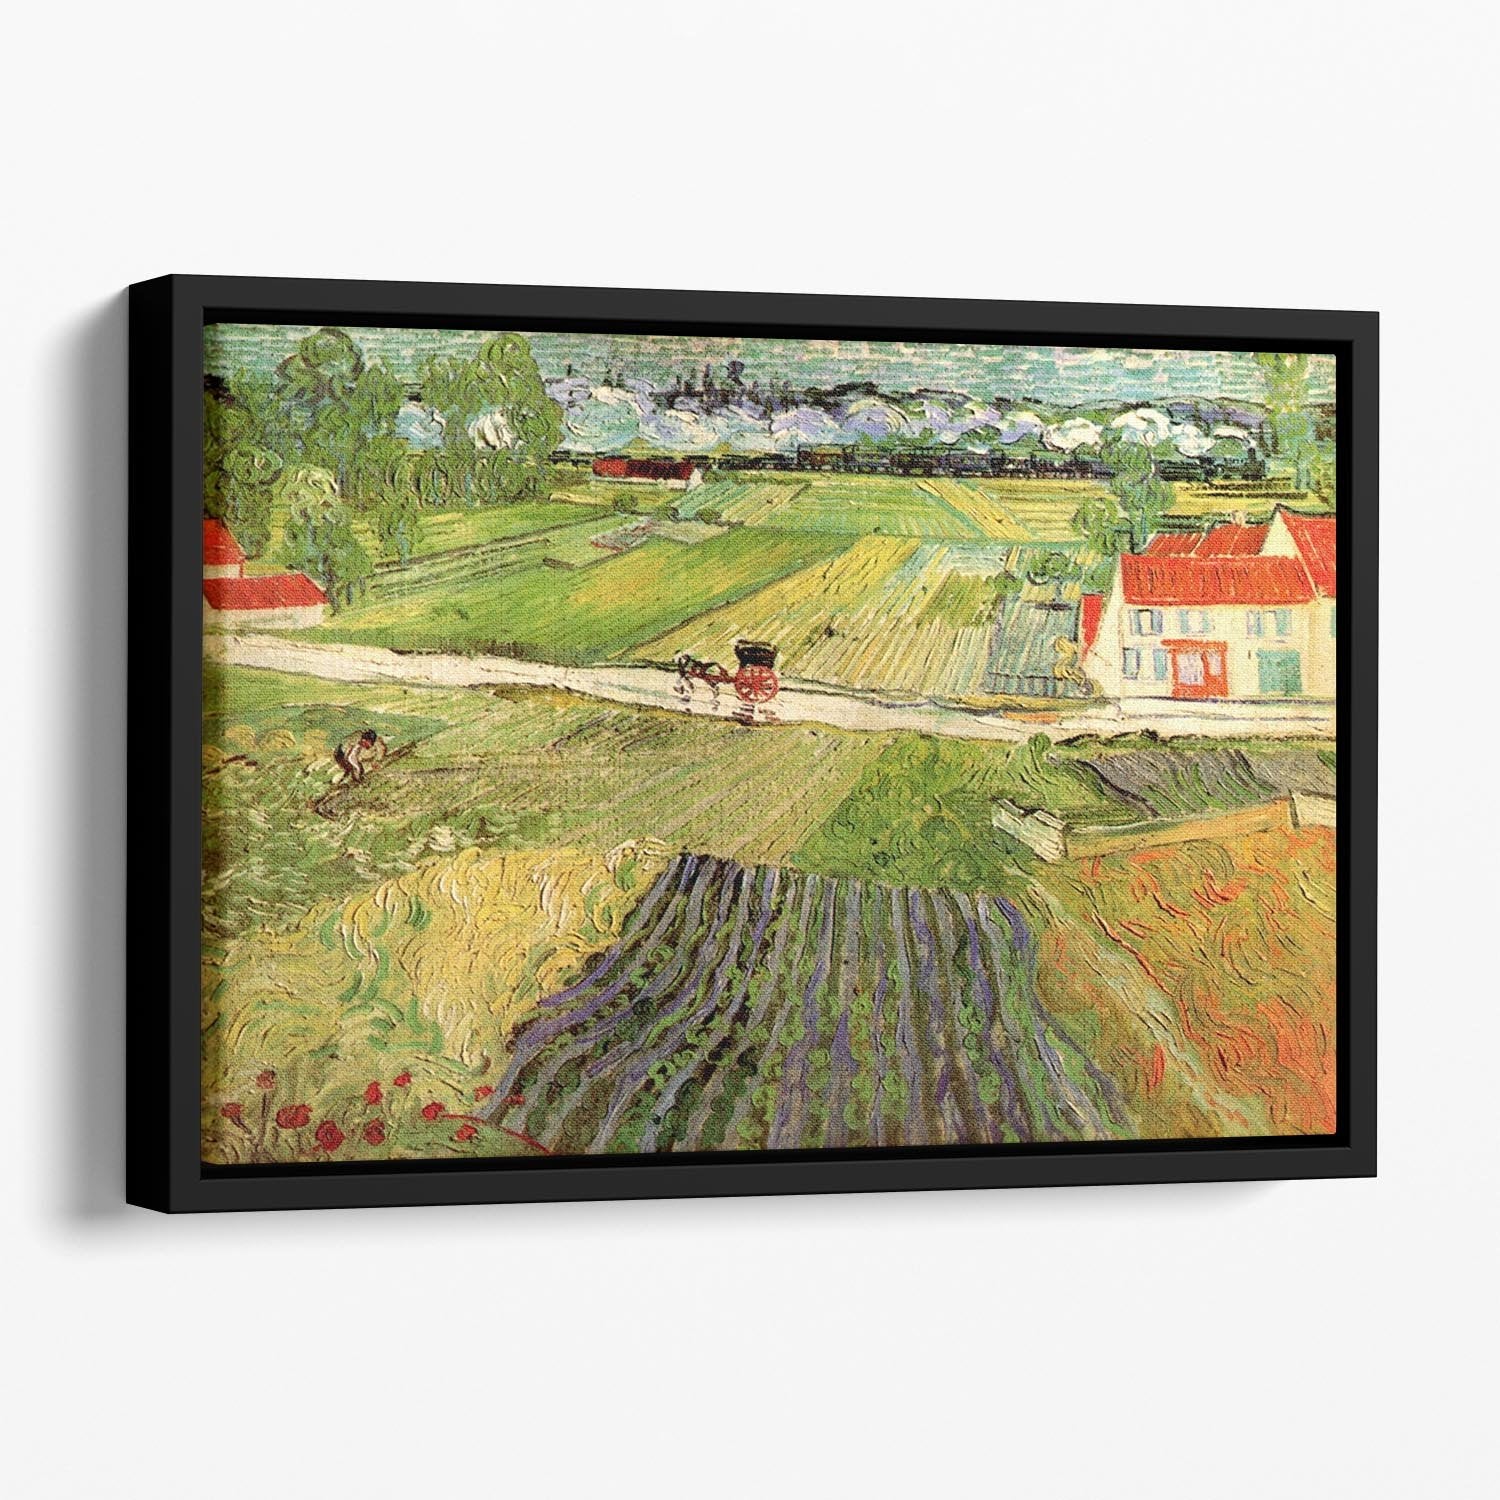 Landscape with Carriage and Train in the Background by Van Gogh Floating Framed Canvas